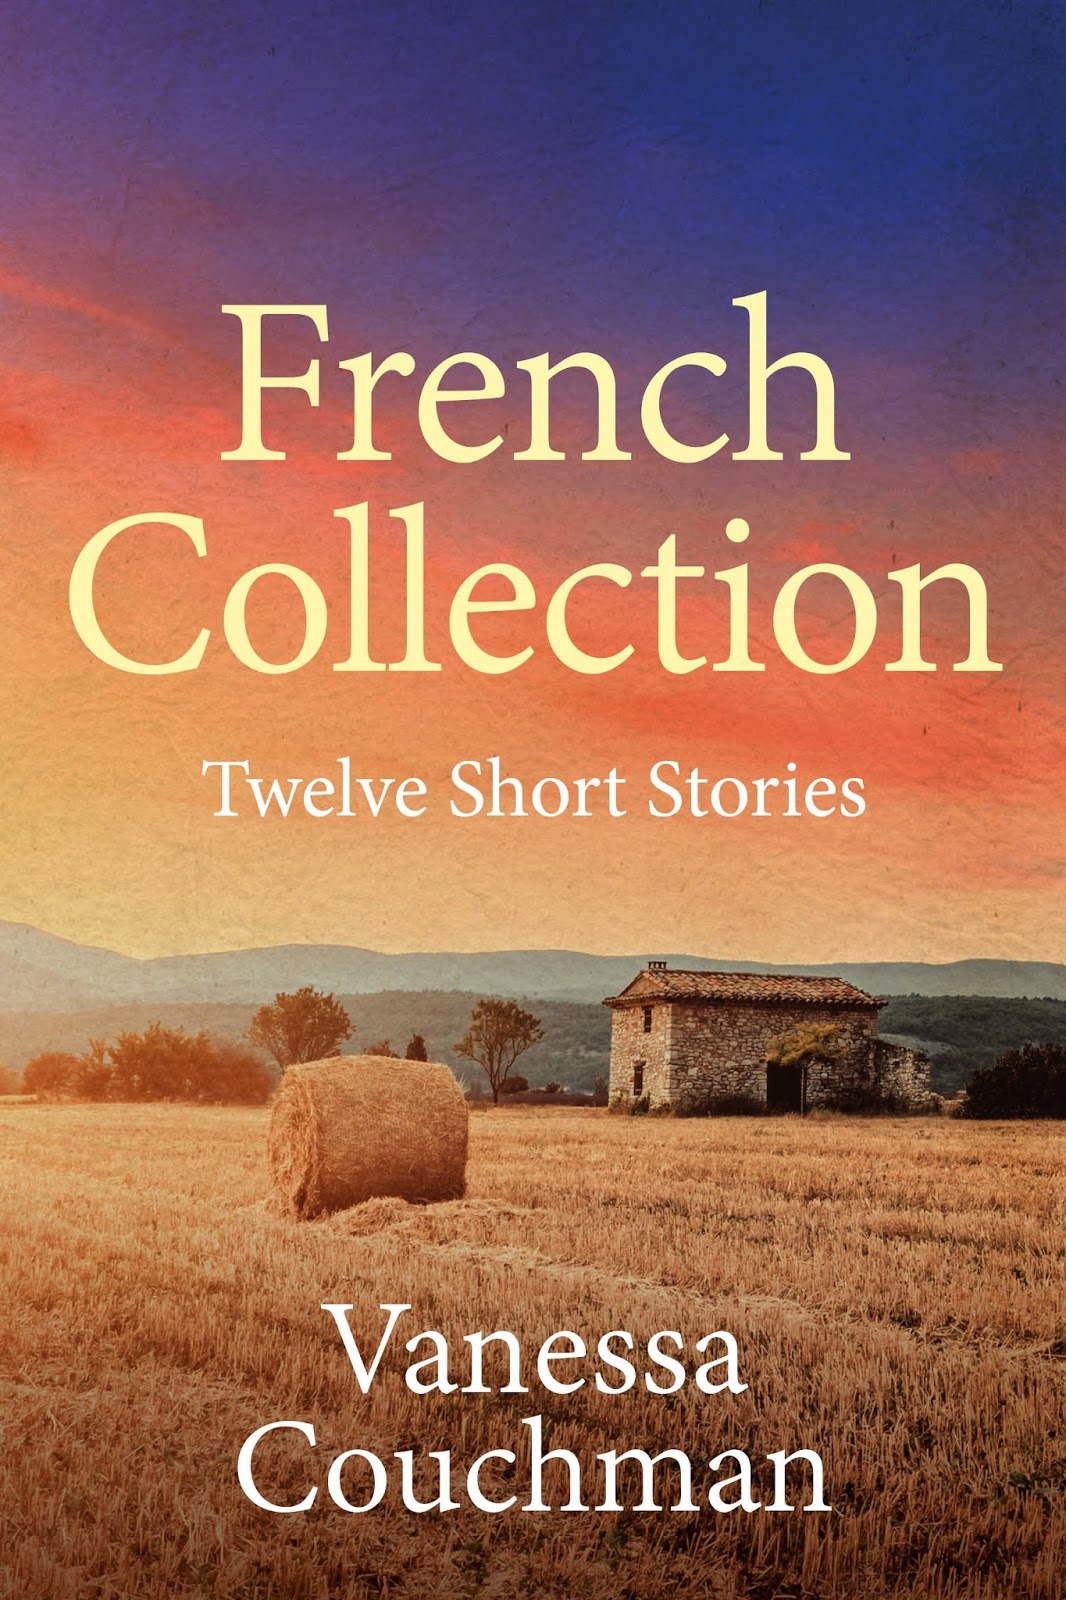 Book review of French Collection by Vanessa Couchman